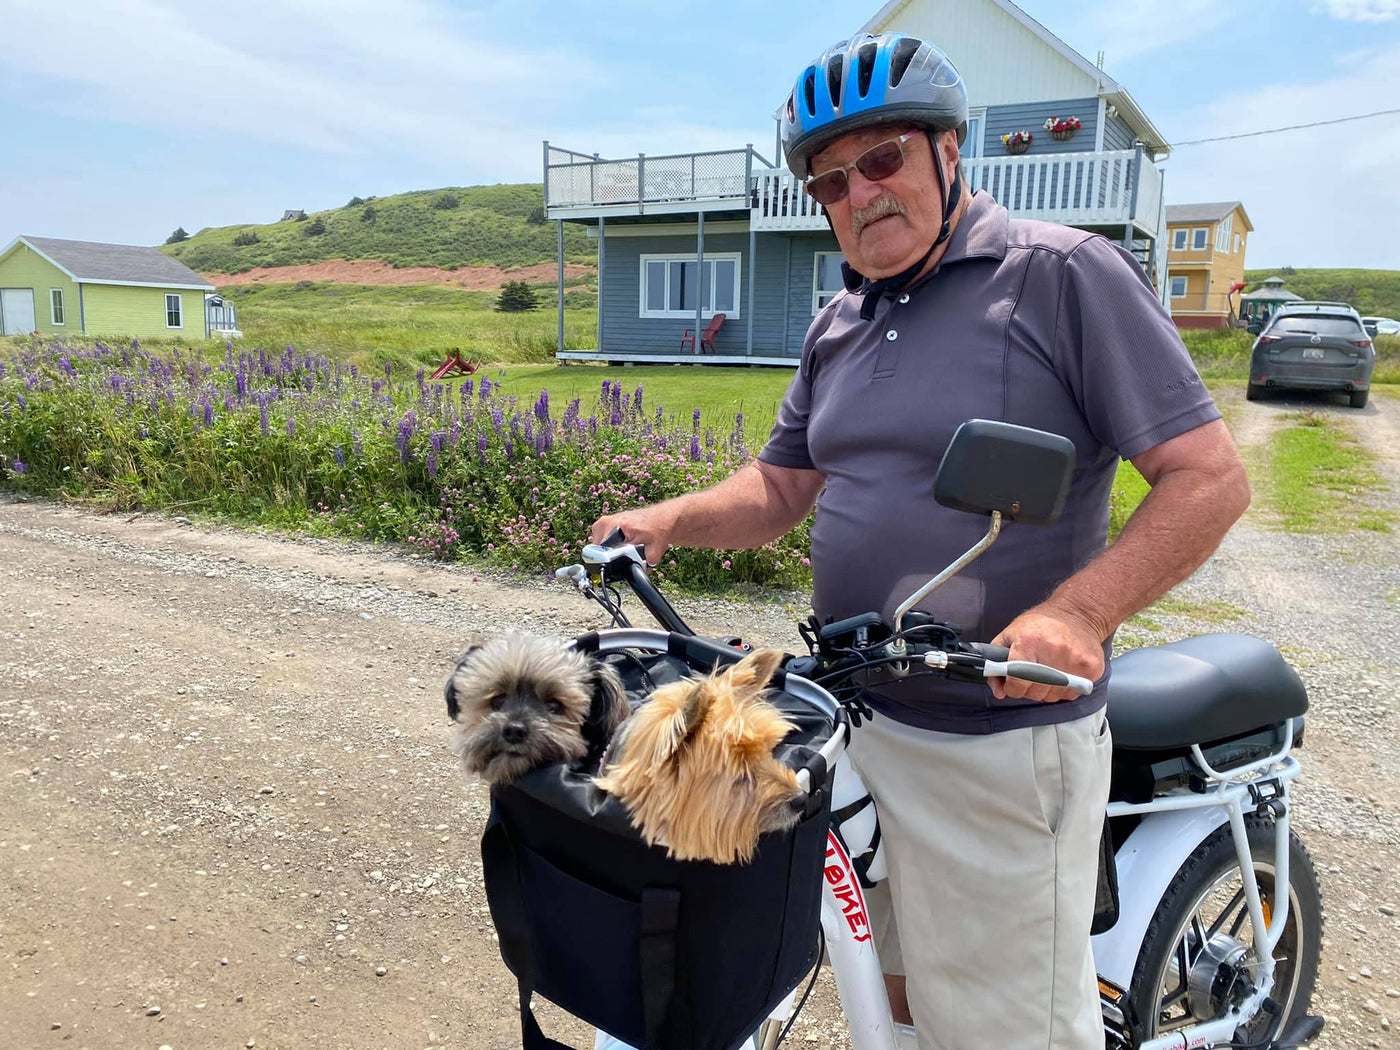 A smiling customer riding a DJ Super Bike e-bike equipped with a front basket holding two Yorkshire Terrier dogs on a dirt road